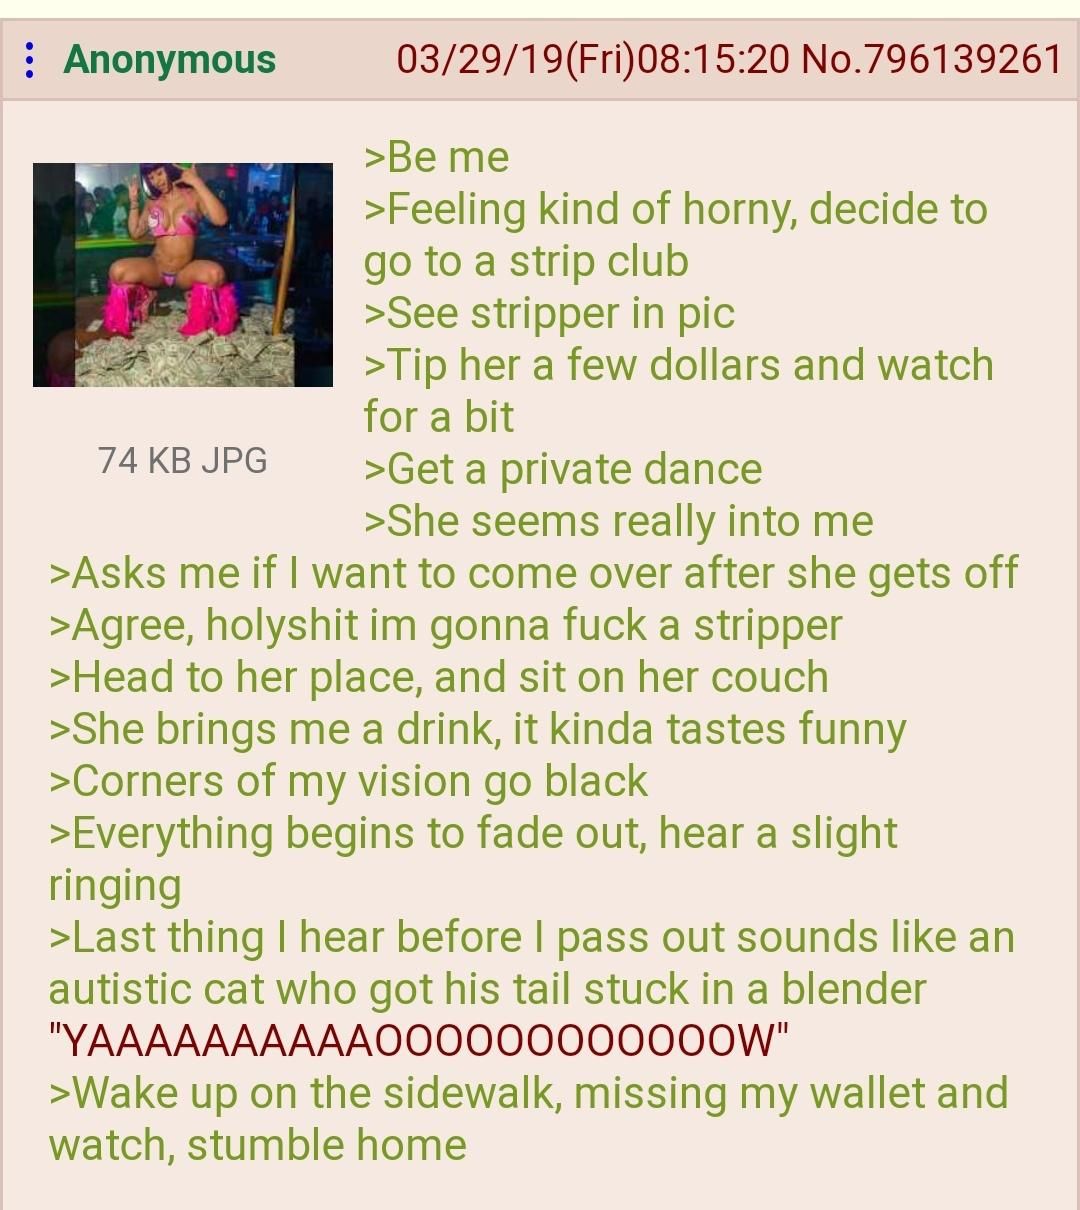 Anon and the stripper